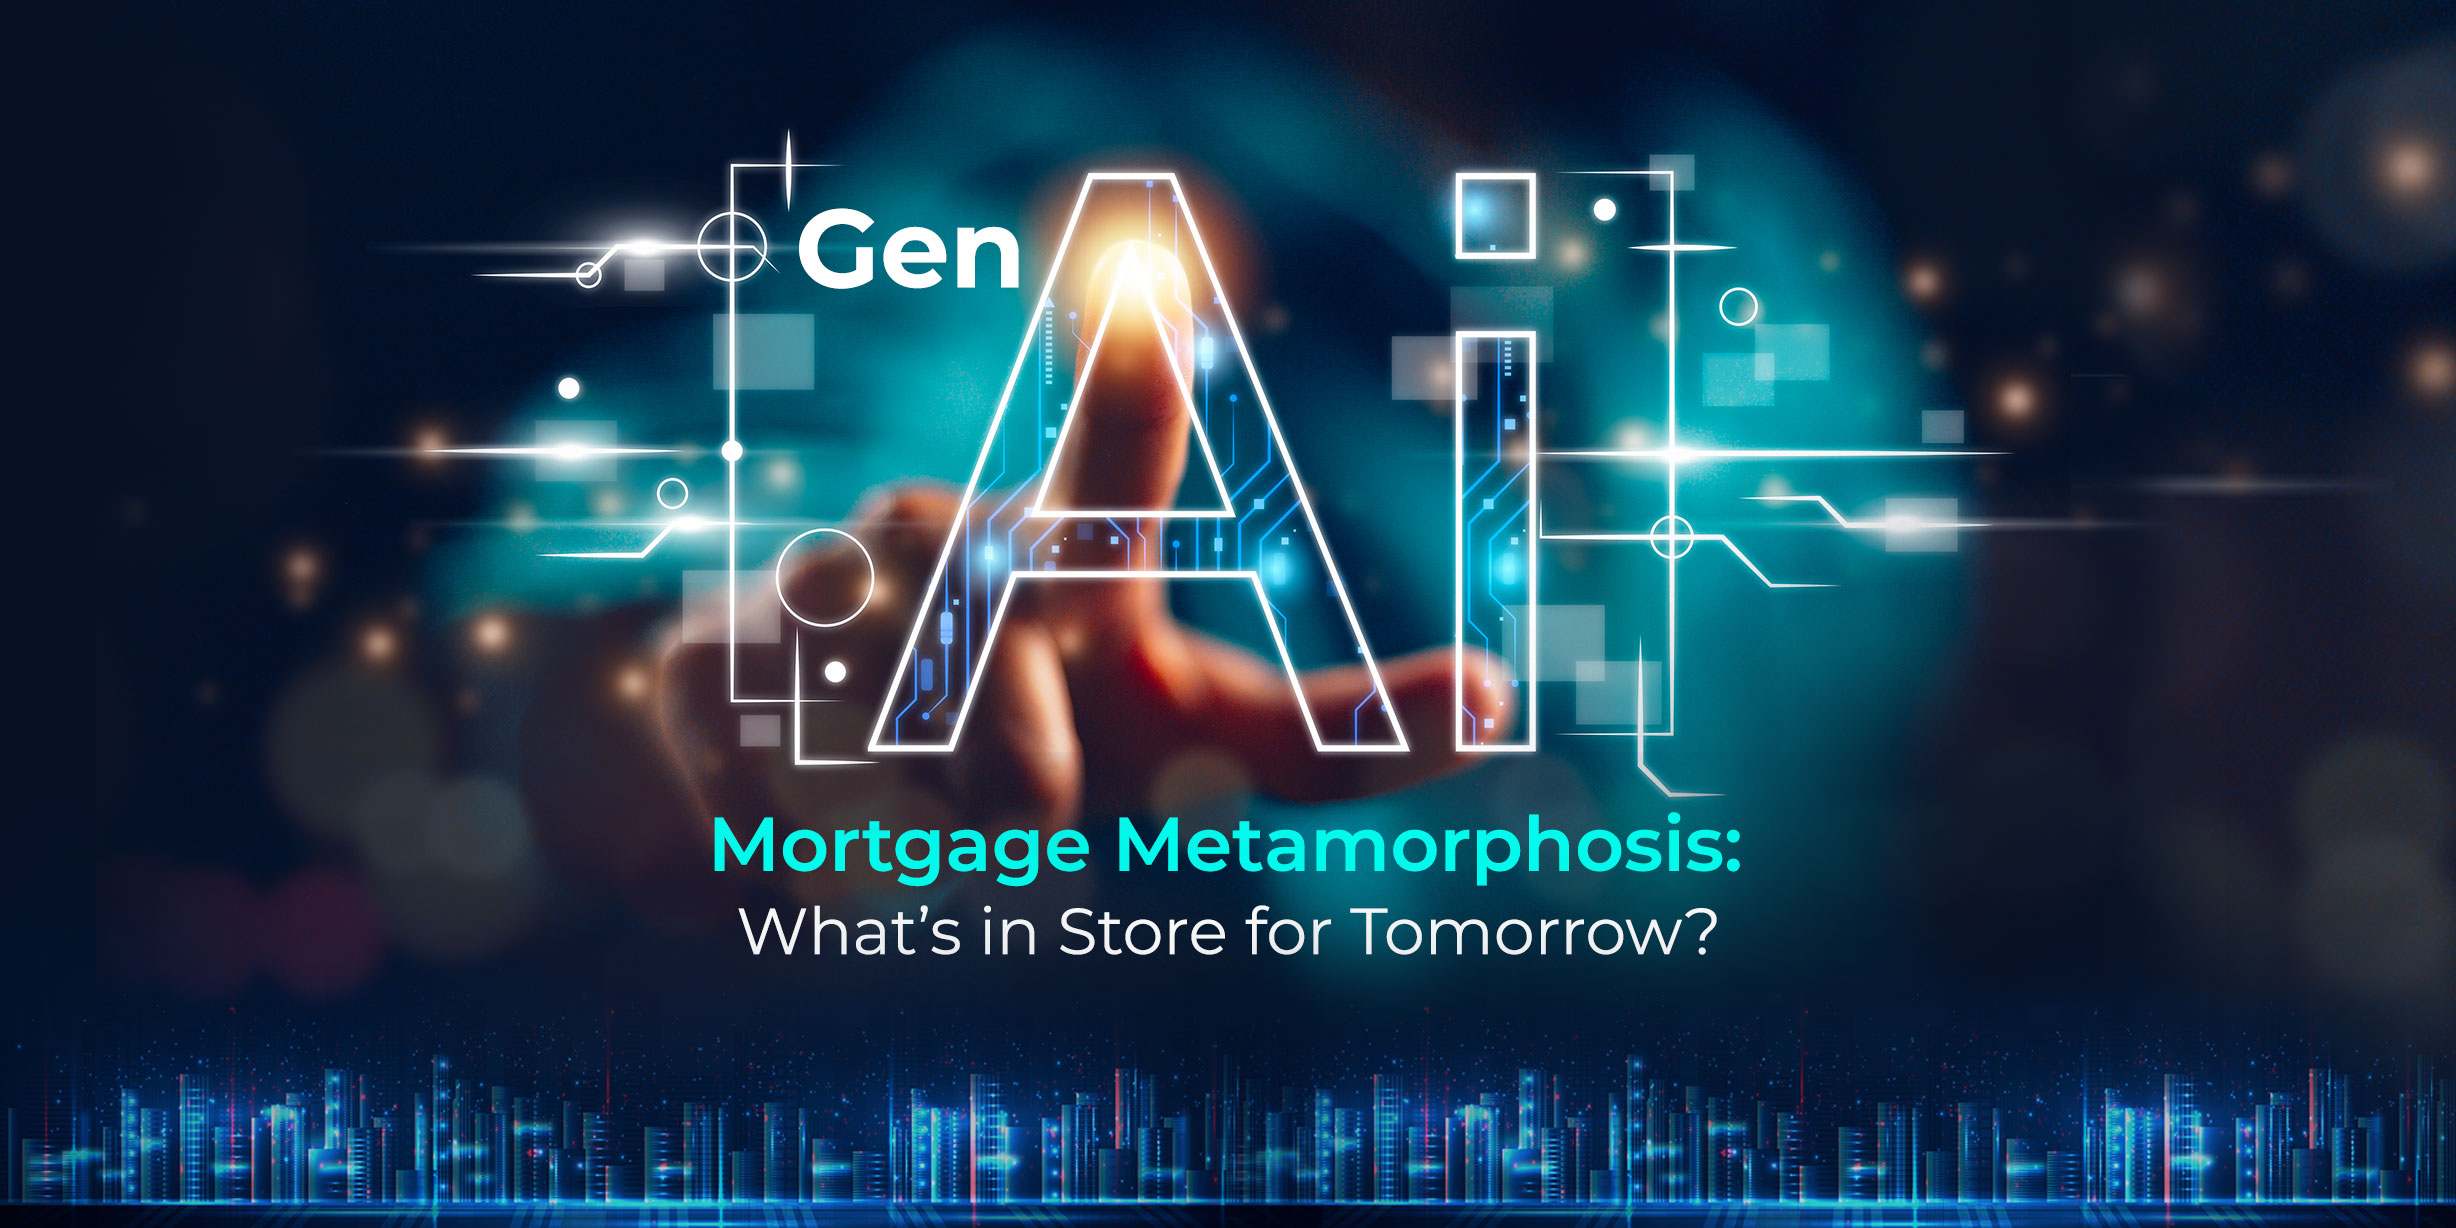 Gen AI Mortgage Metamorphosis: What’s in Store for Tomorrow?